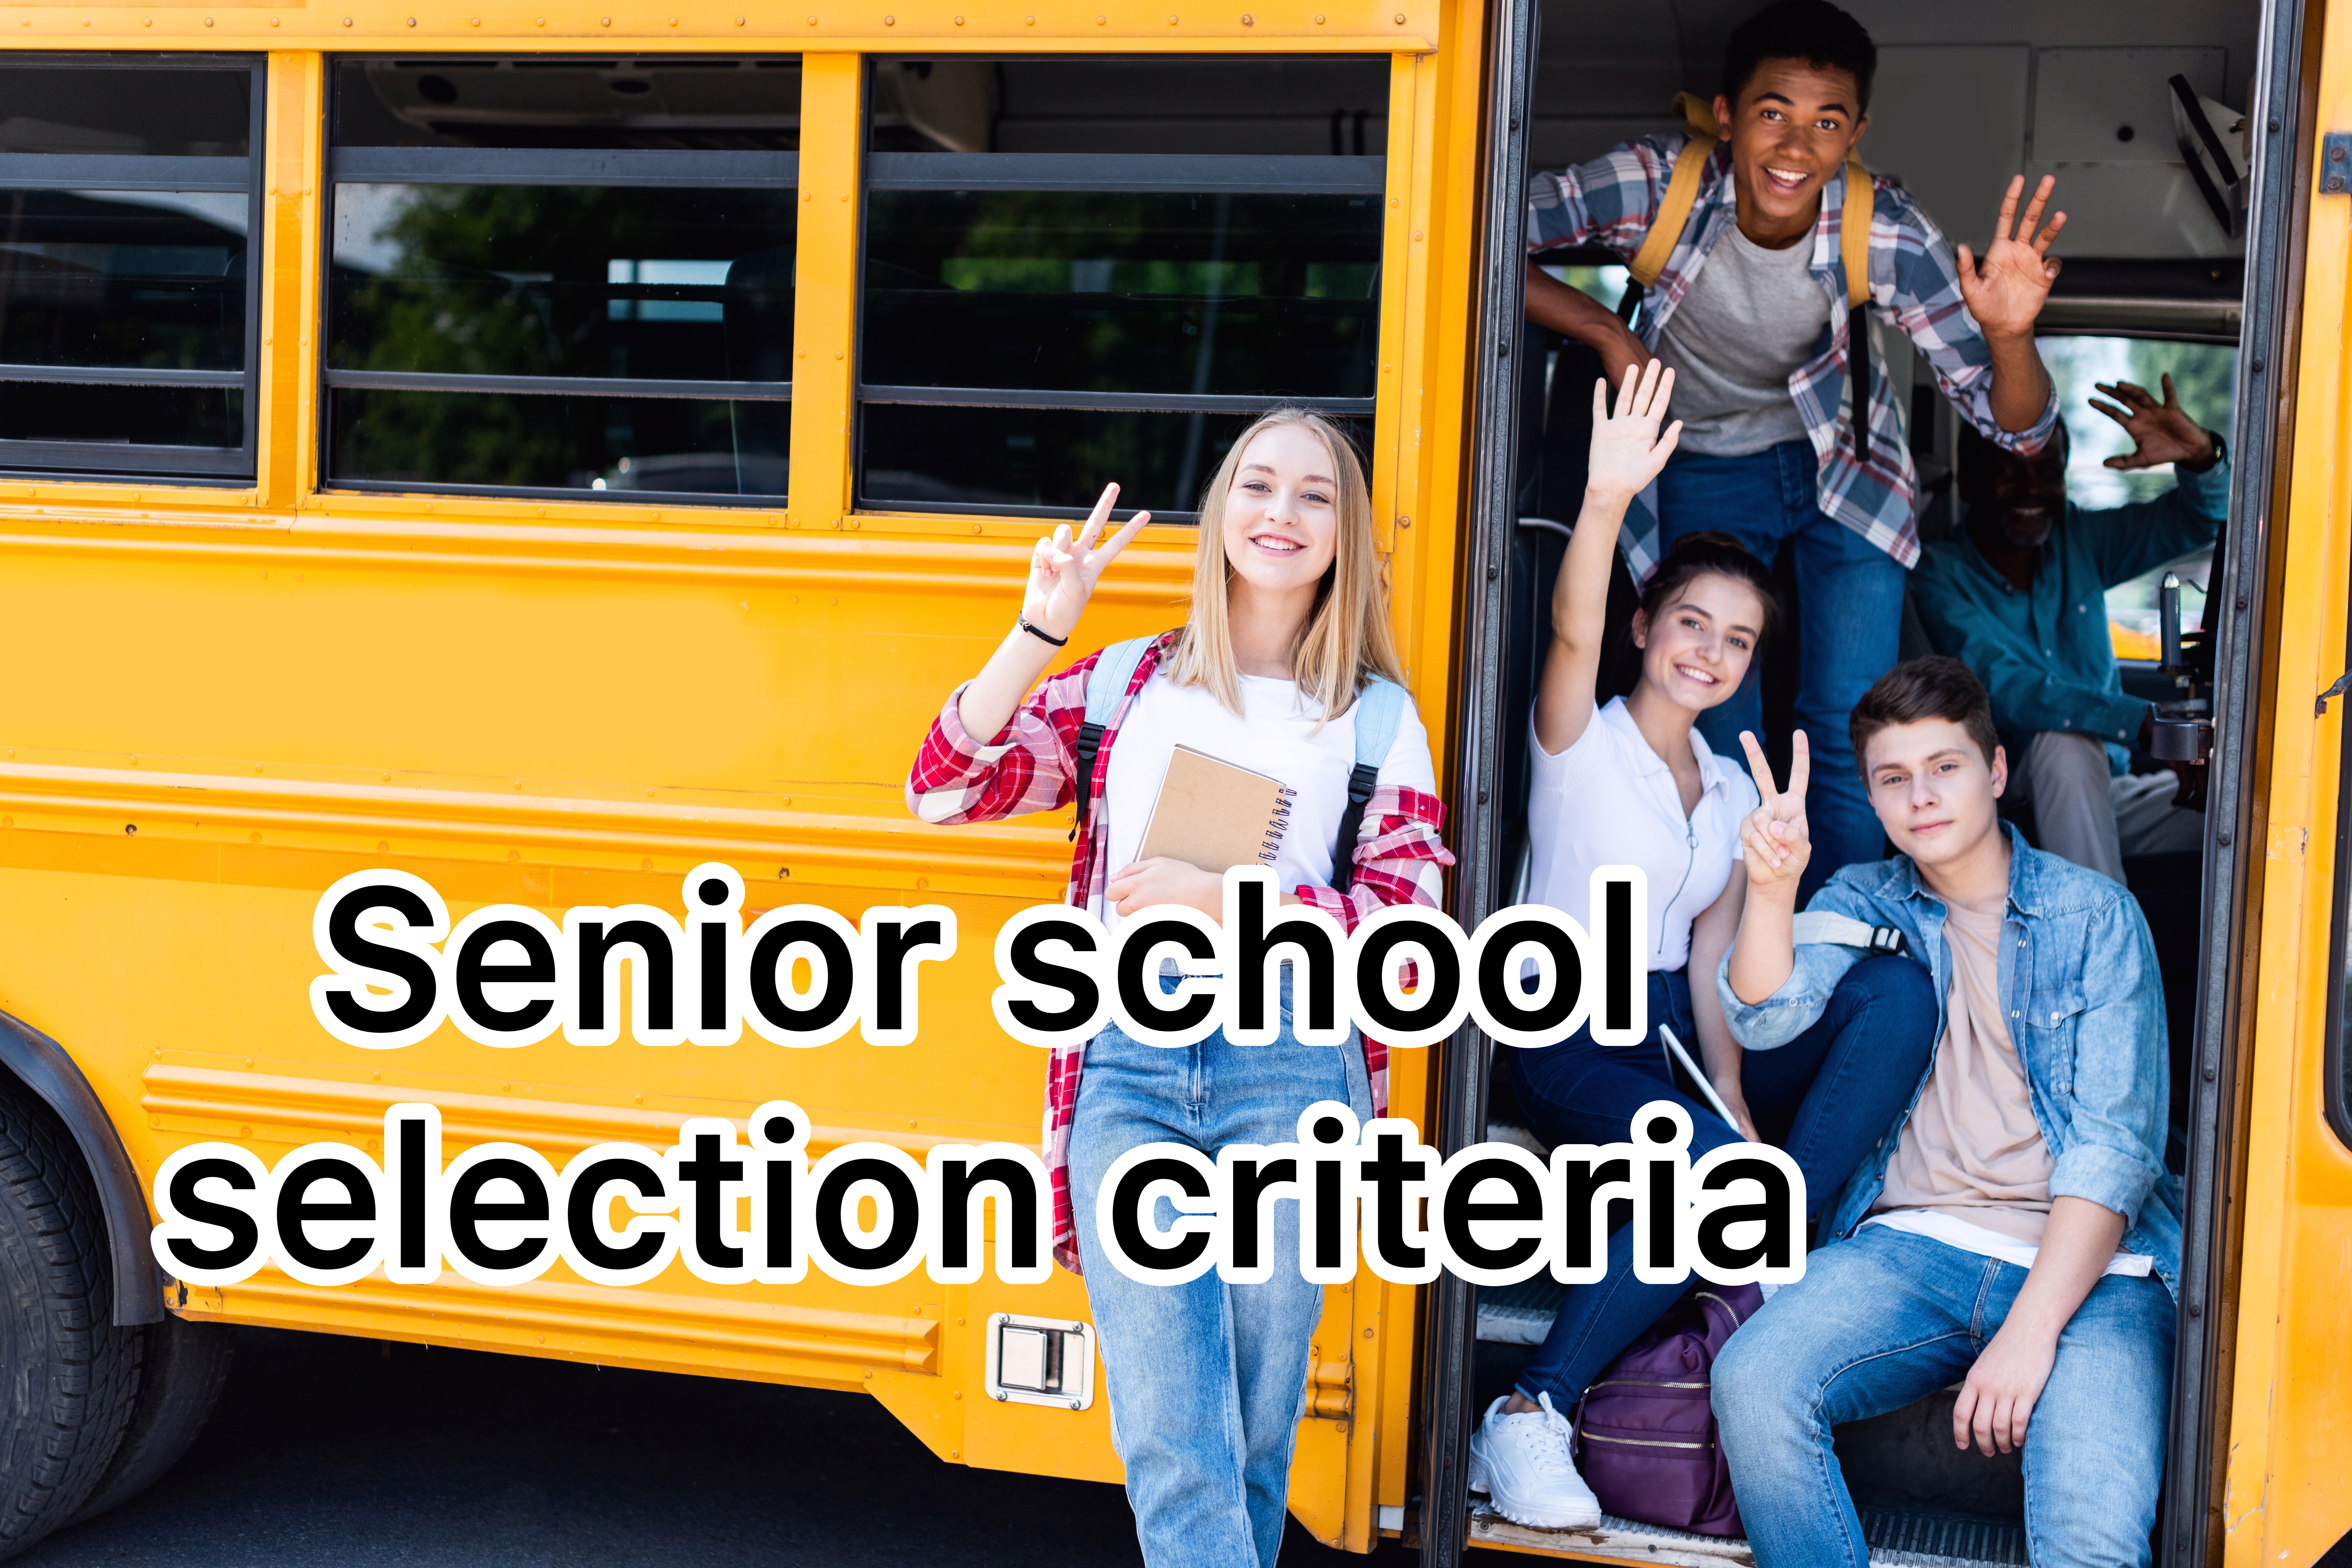 What to look for when choosing a senior school